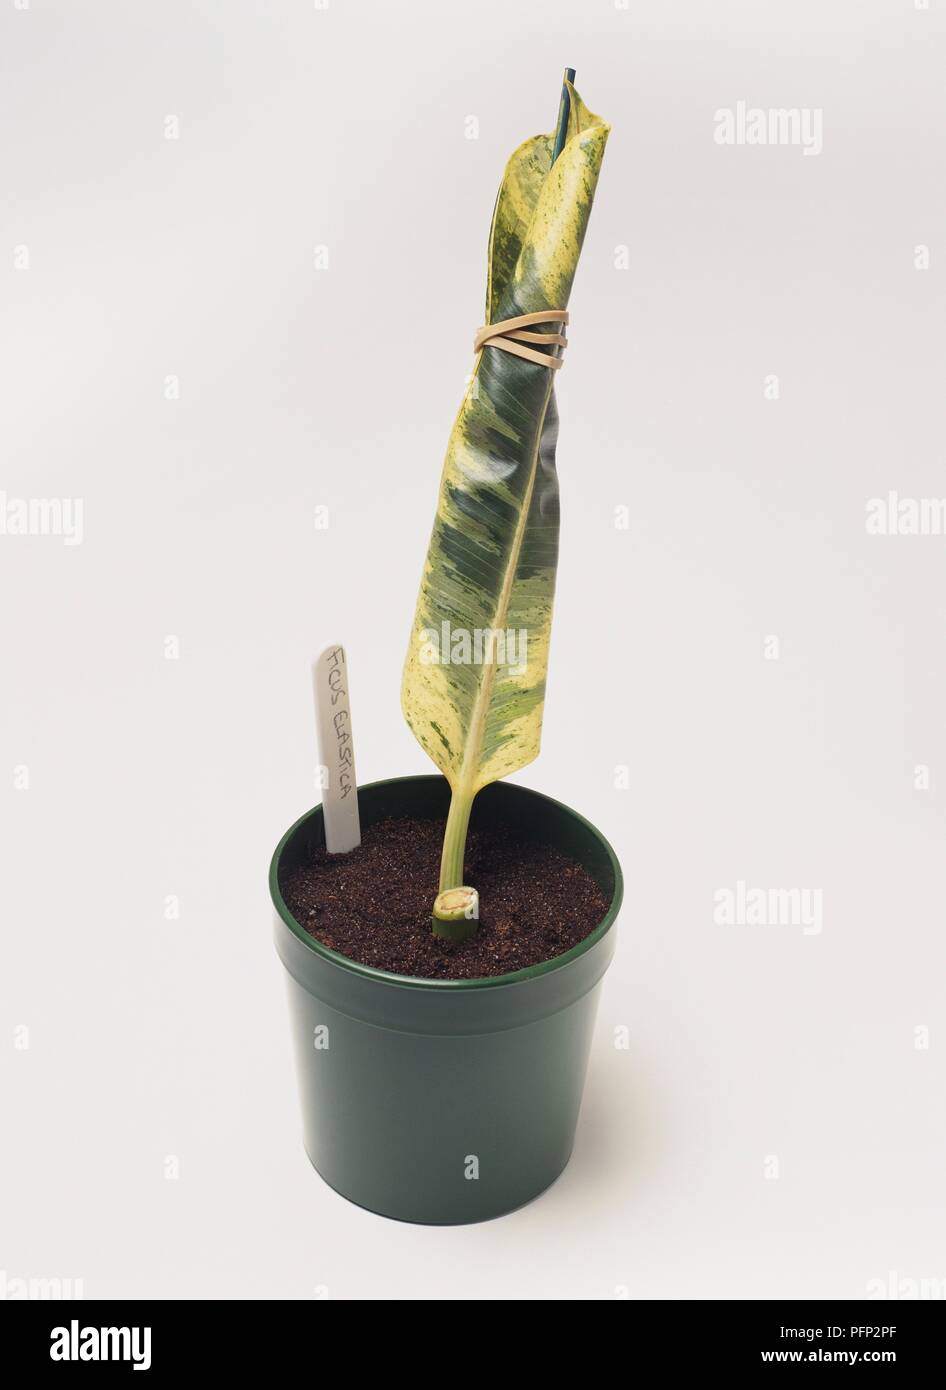 Botany, Flora, Ficus elastica stem cutting and leaf rolled up with rubber  band in plant pot with label Stock Photo - Alamy